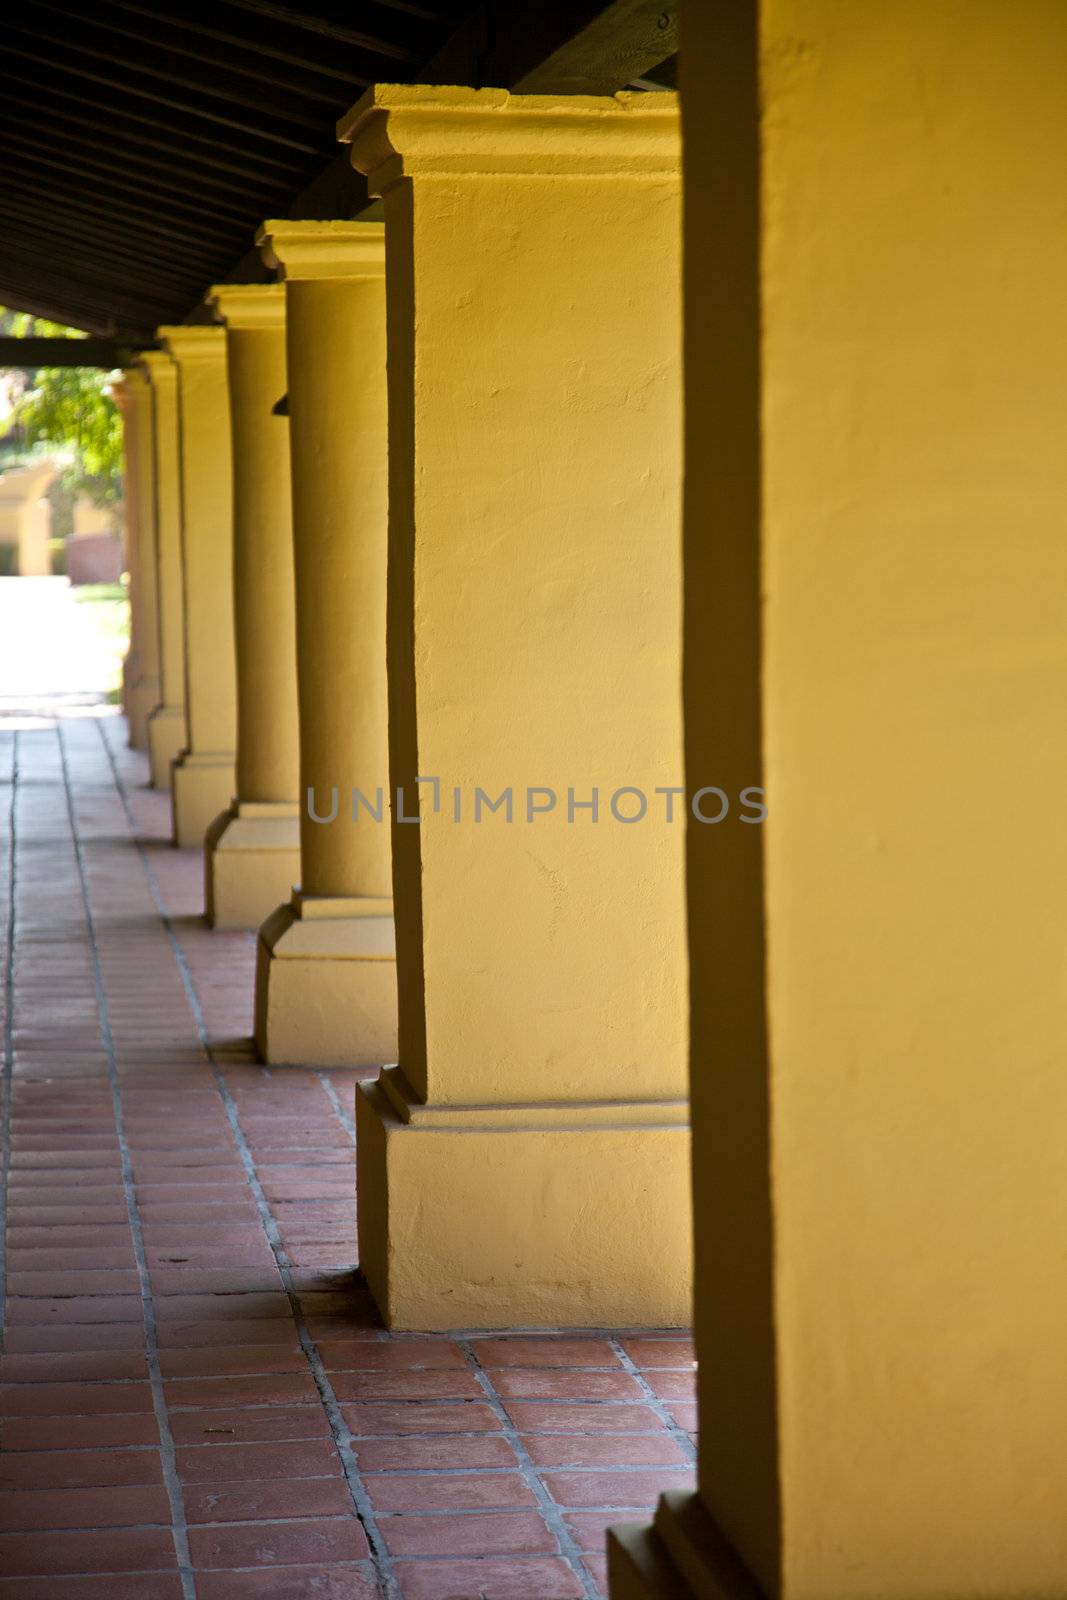 Mission San Fernando Rey de Espa�a is located on the former Encino Rancho in the Mission Hills community of northern Los Angeles, near the site of the first gold discovery in Alta California.